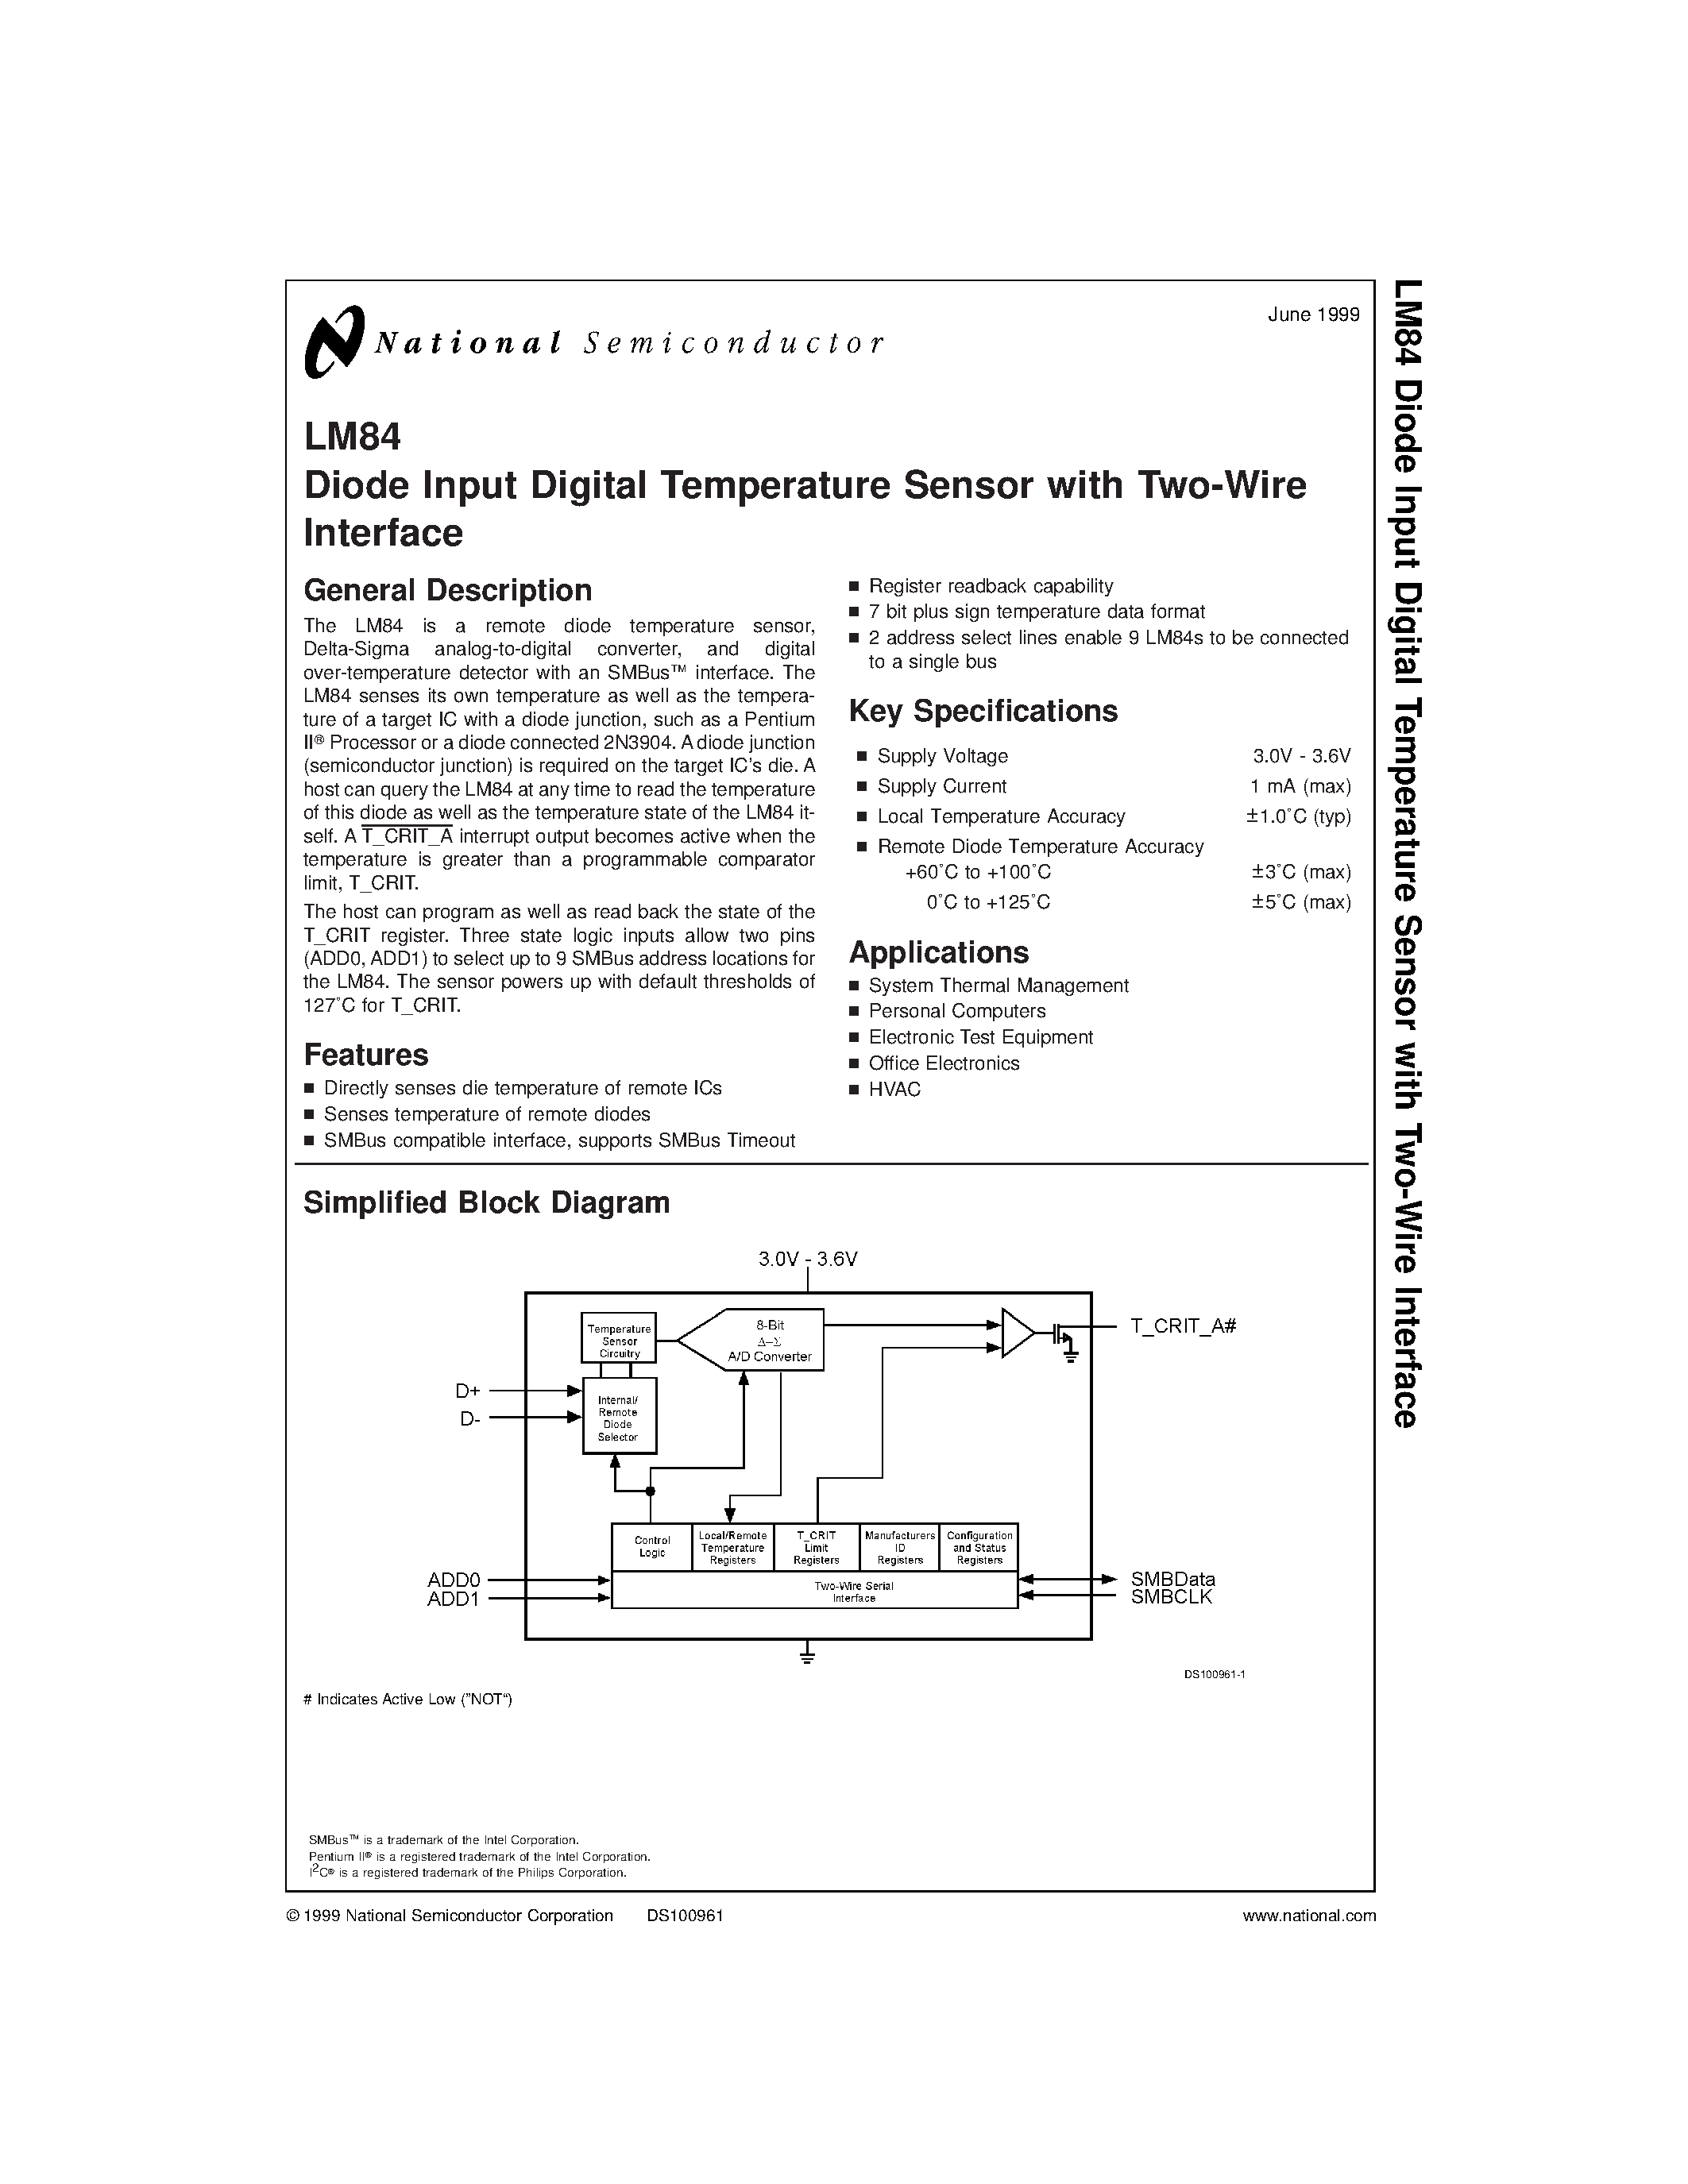 Datasheet LM84 - Diode Input Digital Temperature Sensor with Two-Wire Interface page 1